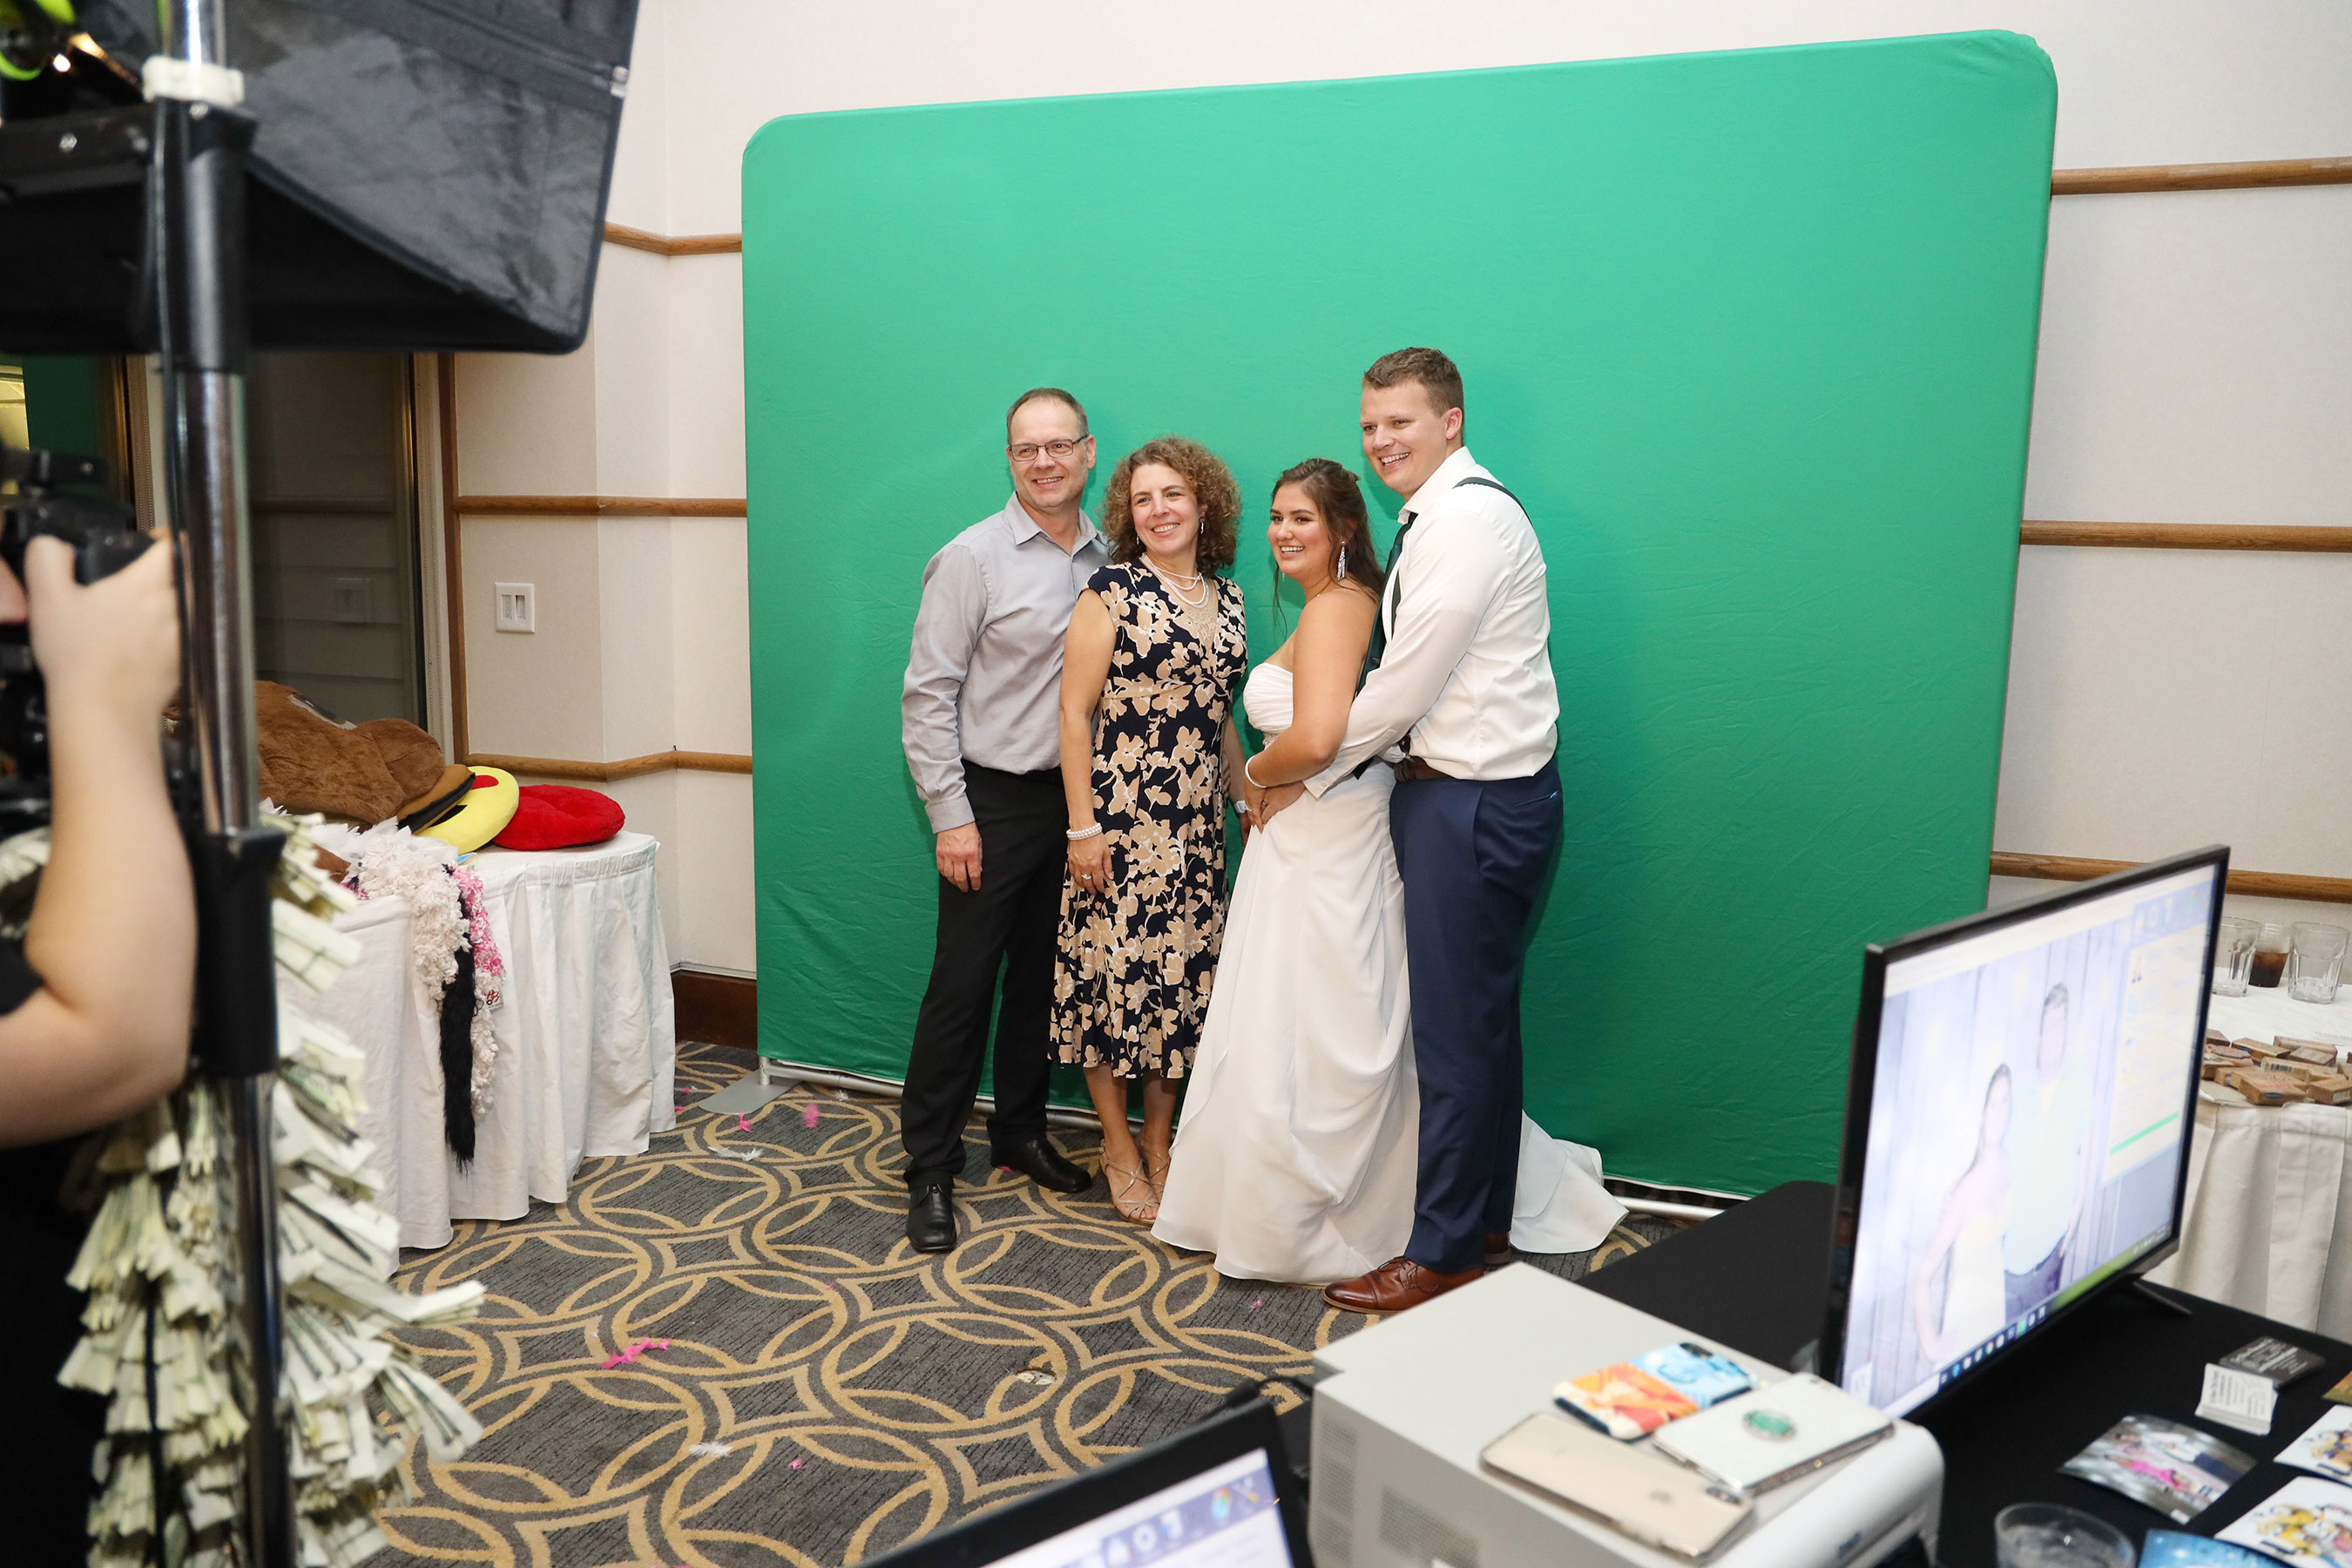 Toledo Green Screen Photo Booth being used by Wedding Guests at Maumee Bay State Park Resort and Lodge